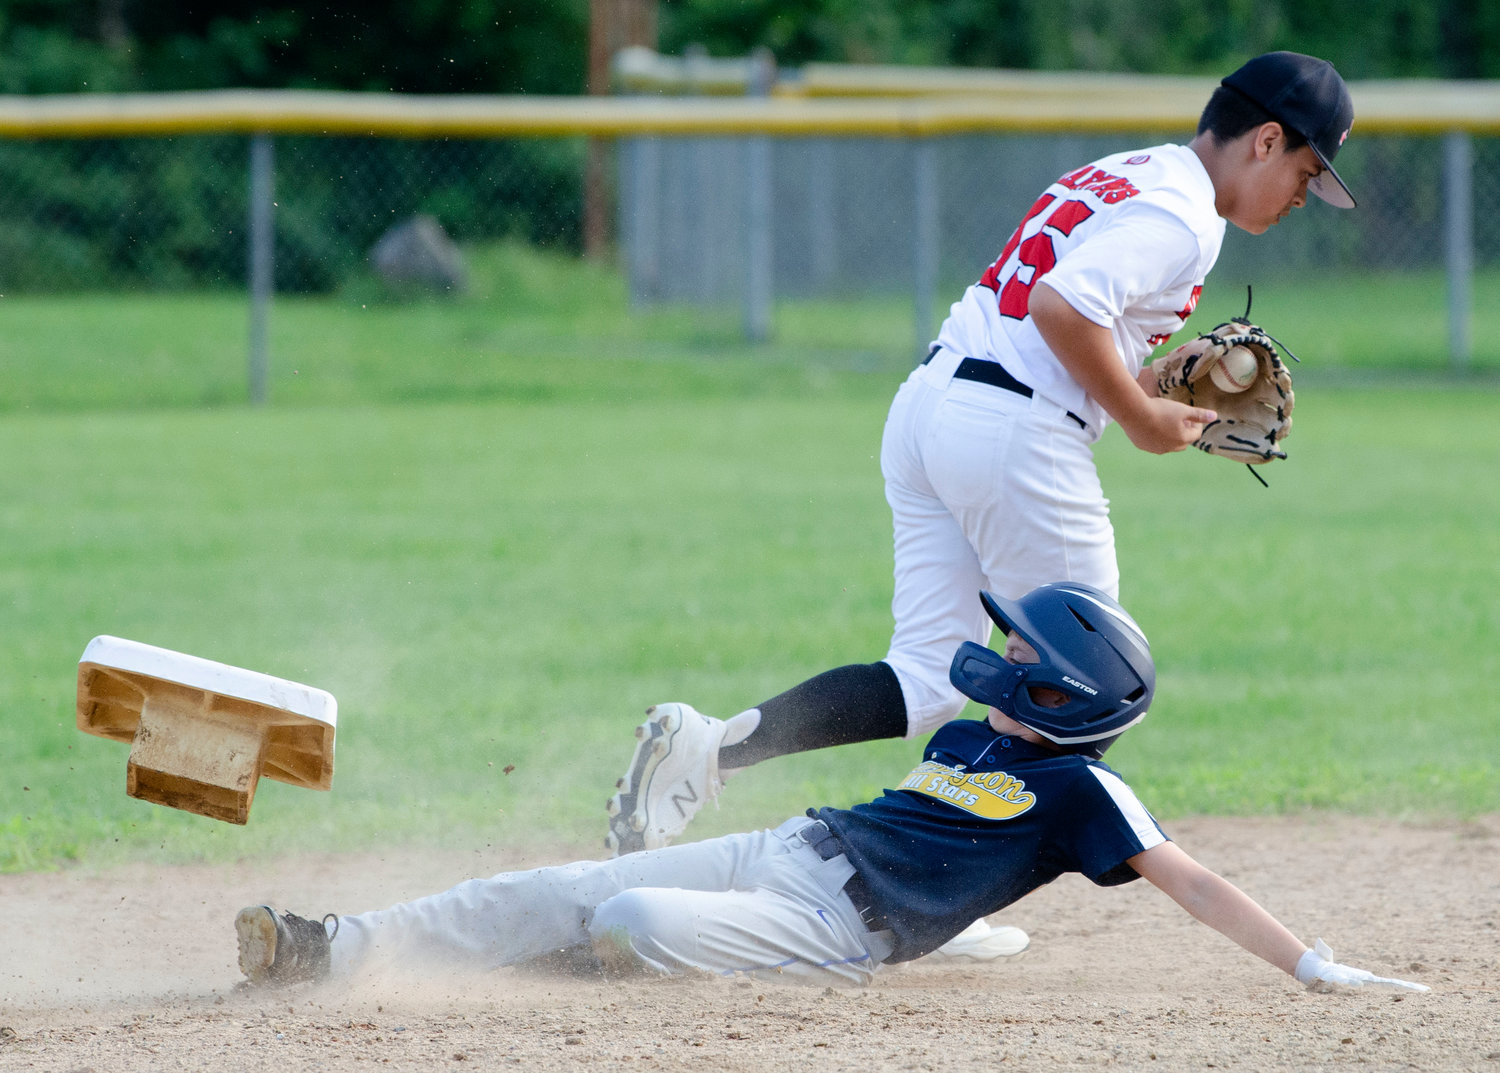 Barrington’s Miles Dolan is out at second during a play in the first game of the District 2 finals. Barrington went on to win the game, 2-0, and force a second, deciding game.